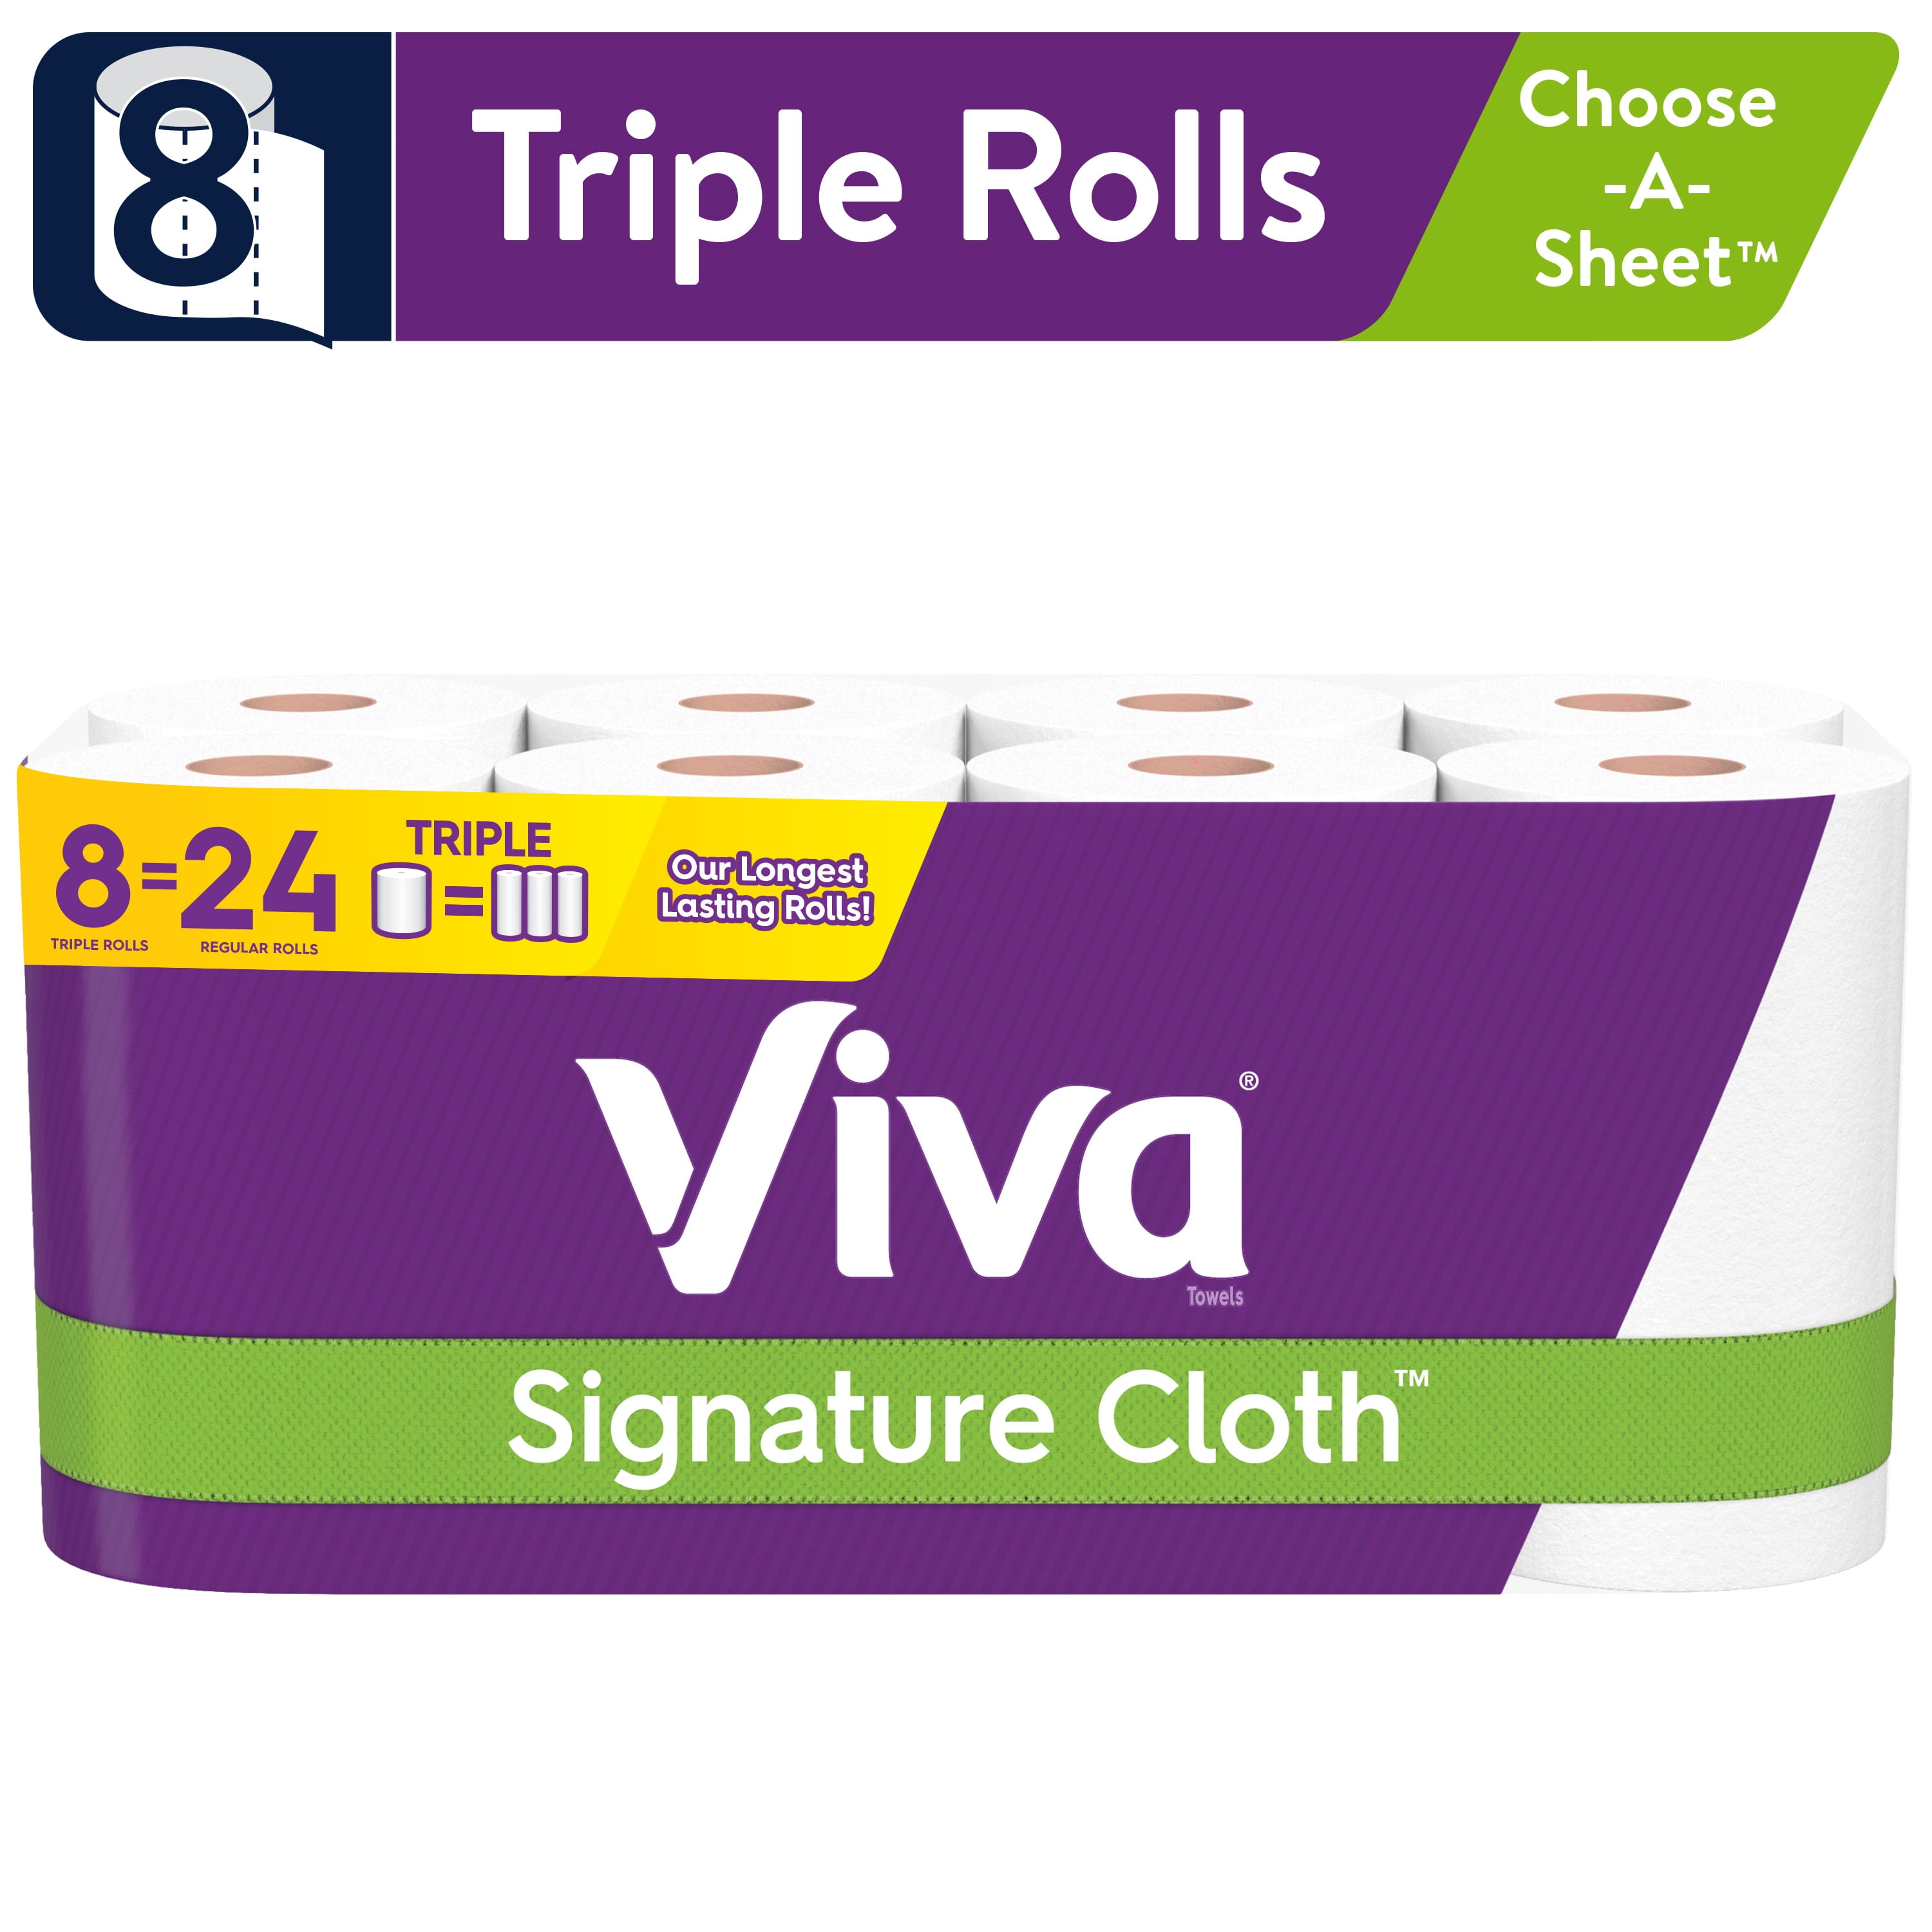 White VIVA Choose-A-Sheet* Paper Towels Double Roll 6 Rolls 